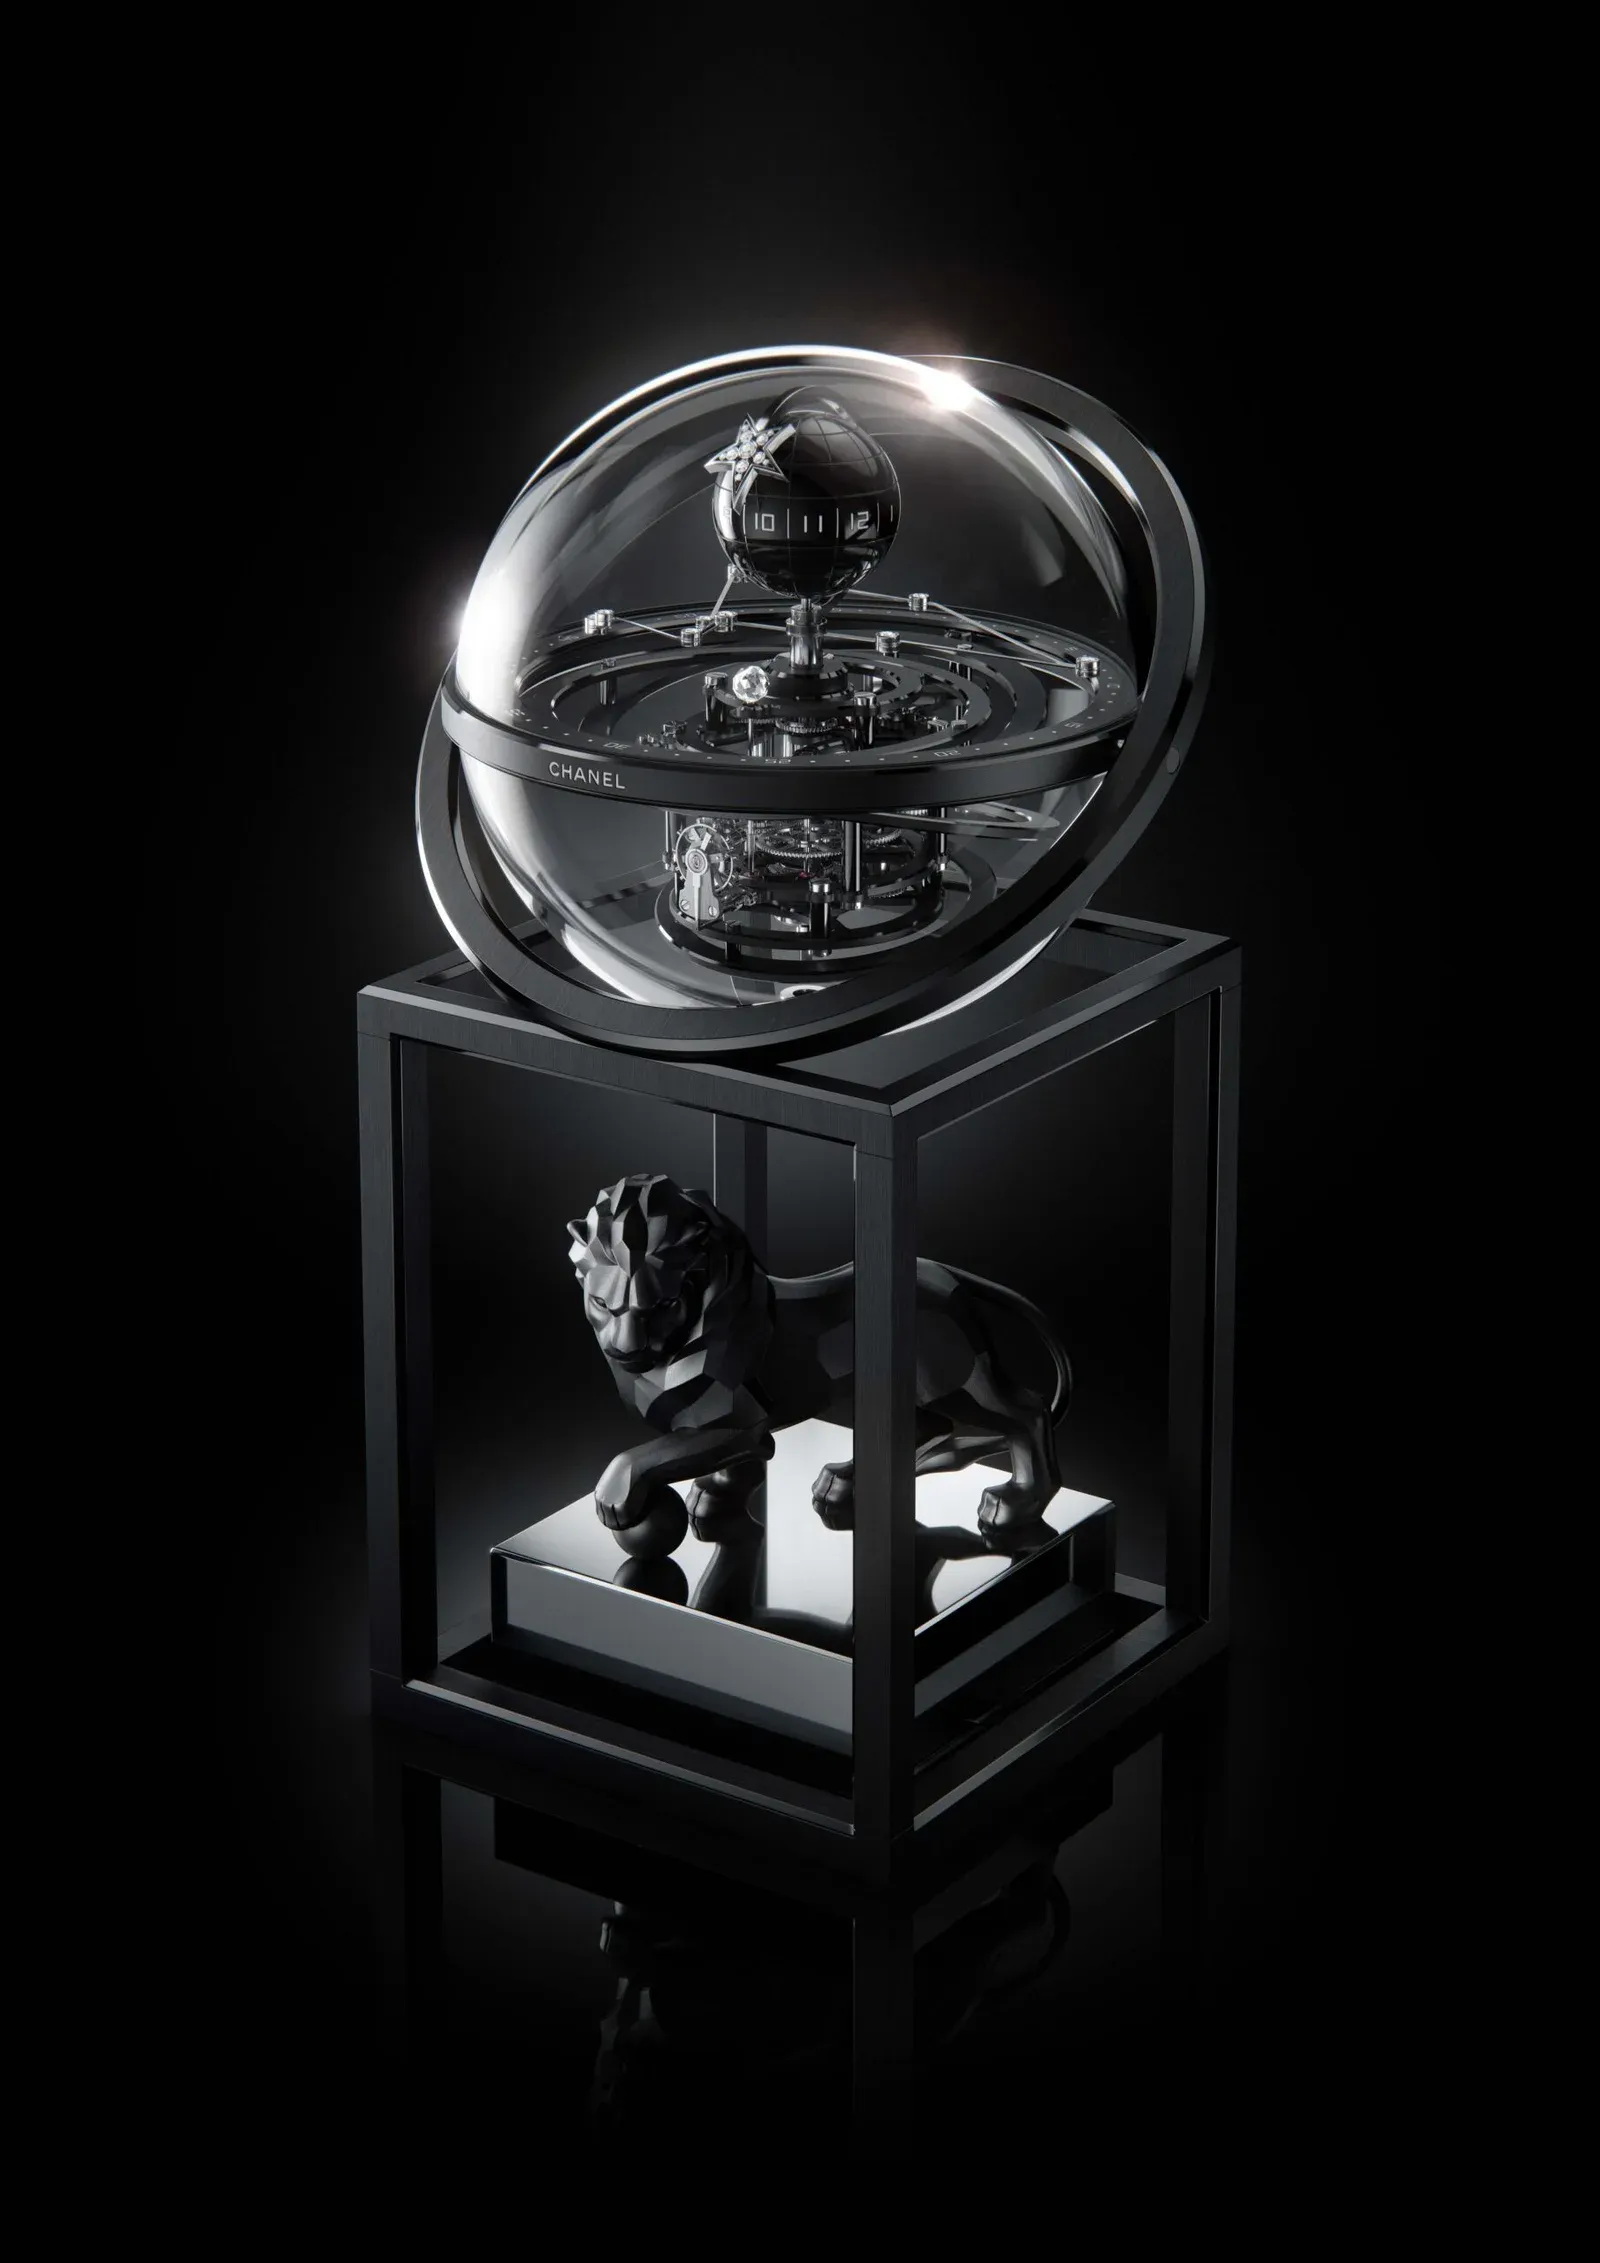 Chanel Lion Astroclock inspired by the Gabrielle Chanel’s star sign Leo, limited to five pieces only